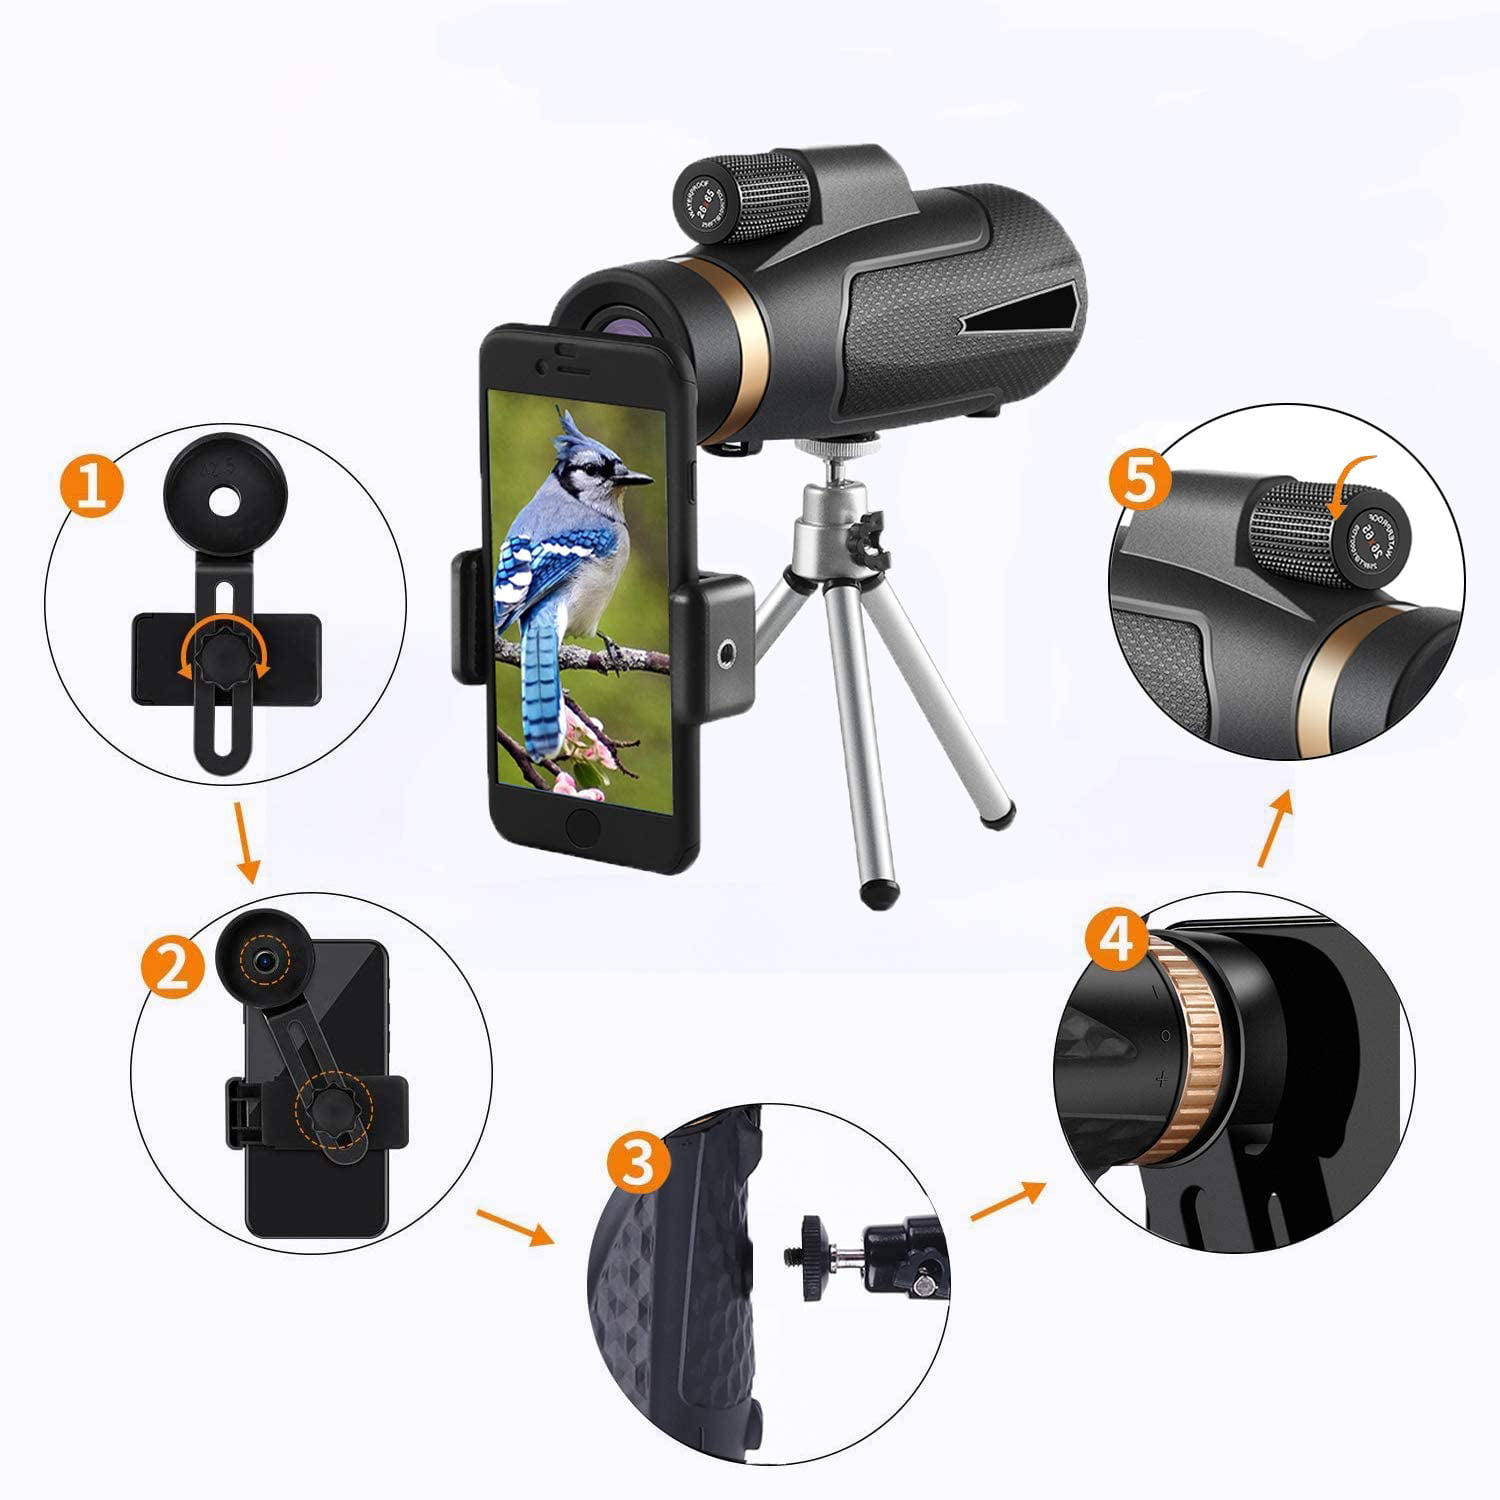 SIHEA Starscope Monocular Large Objective Len High Definition BAK4 Prism & FMC HD with Smartphone Holder & Tripod,for Camping,Bird Watching,Wildlife Scenery,Hiking 14X65 Monocular Telescope Newest 